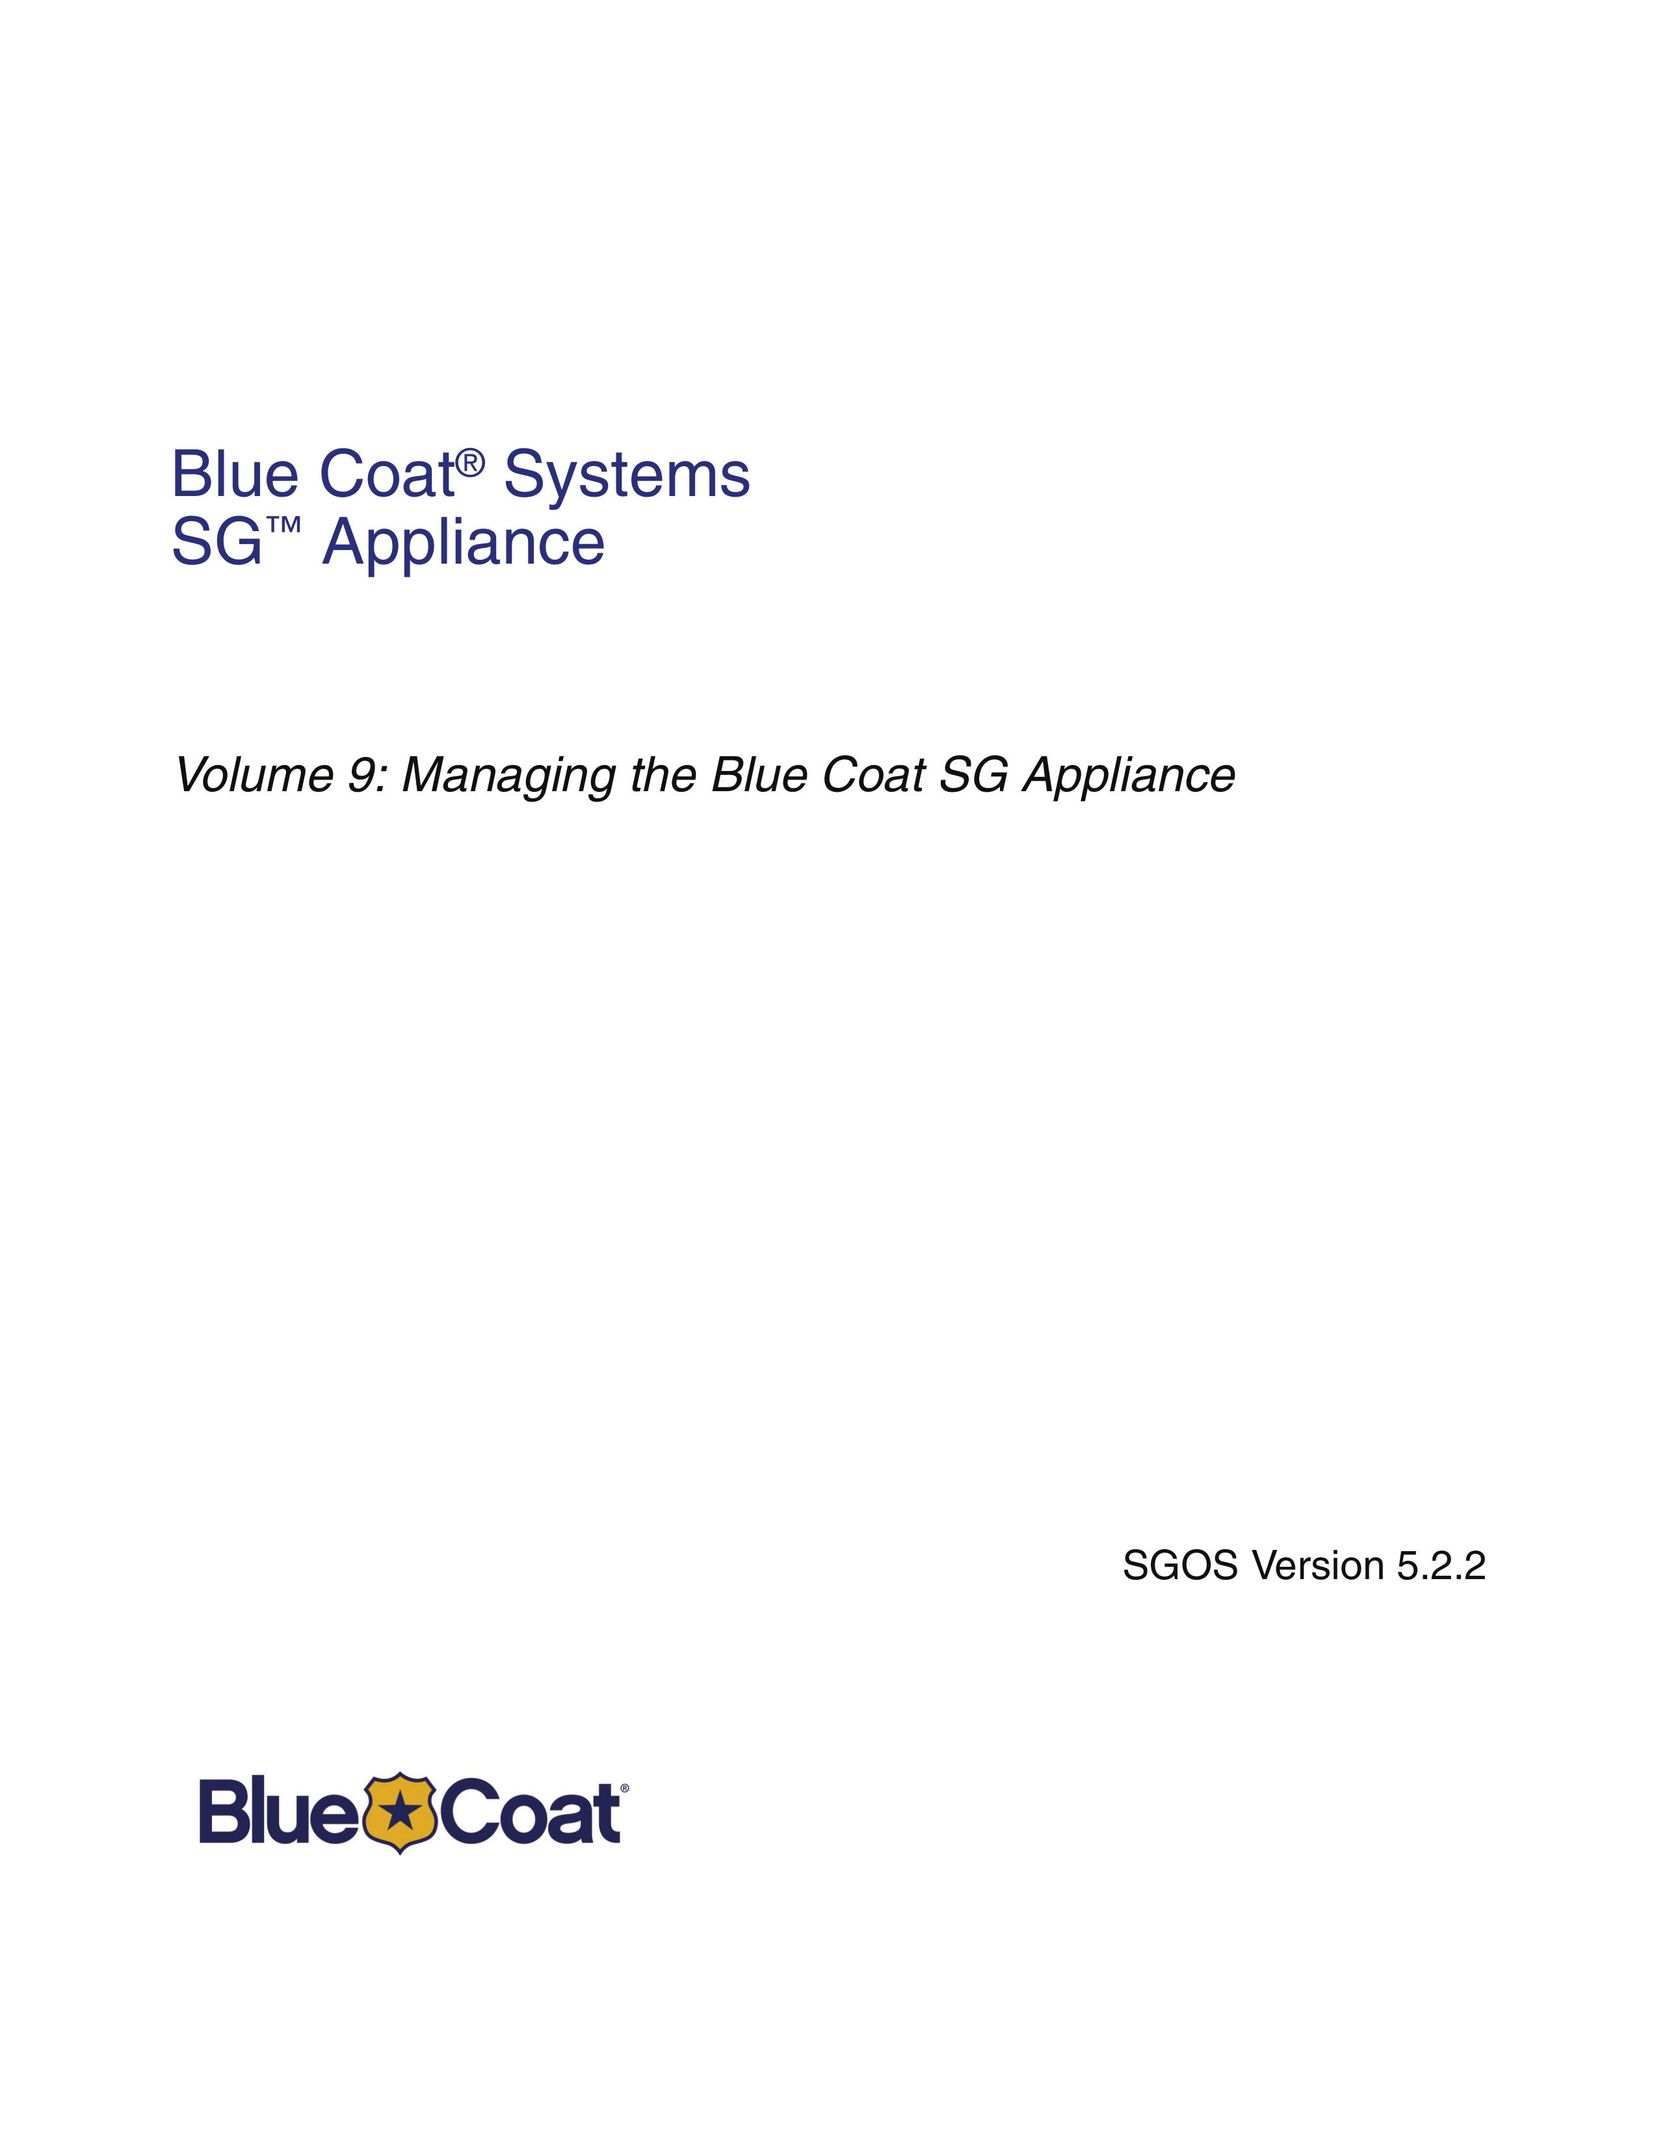 Blue Coat Systems SGOS Version 5.2.2 Appliance Trim Kit User Manual (Page 1)